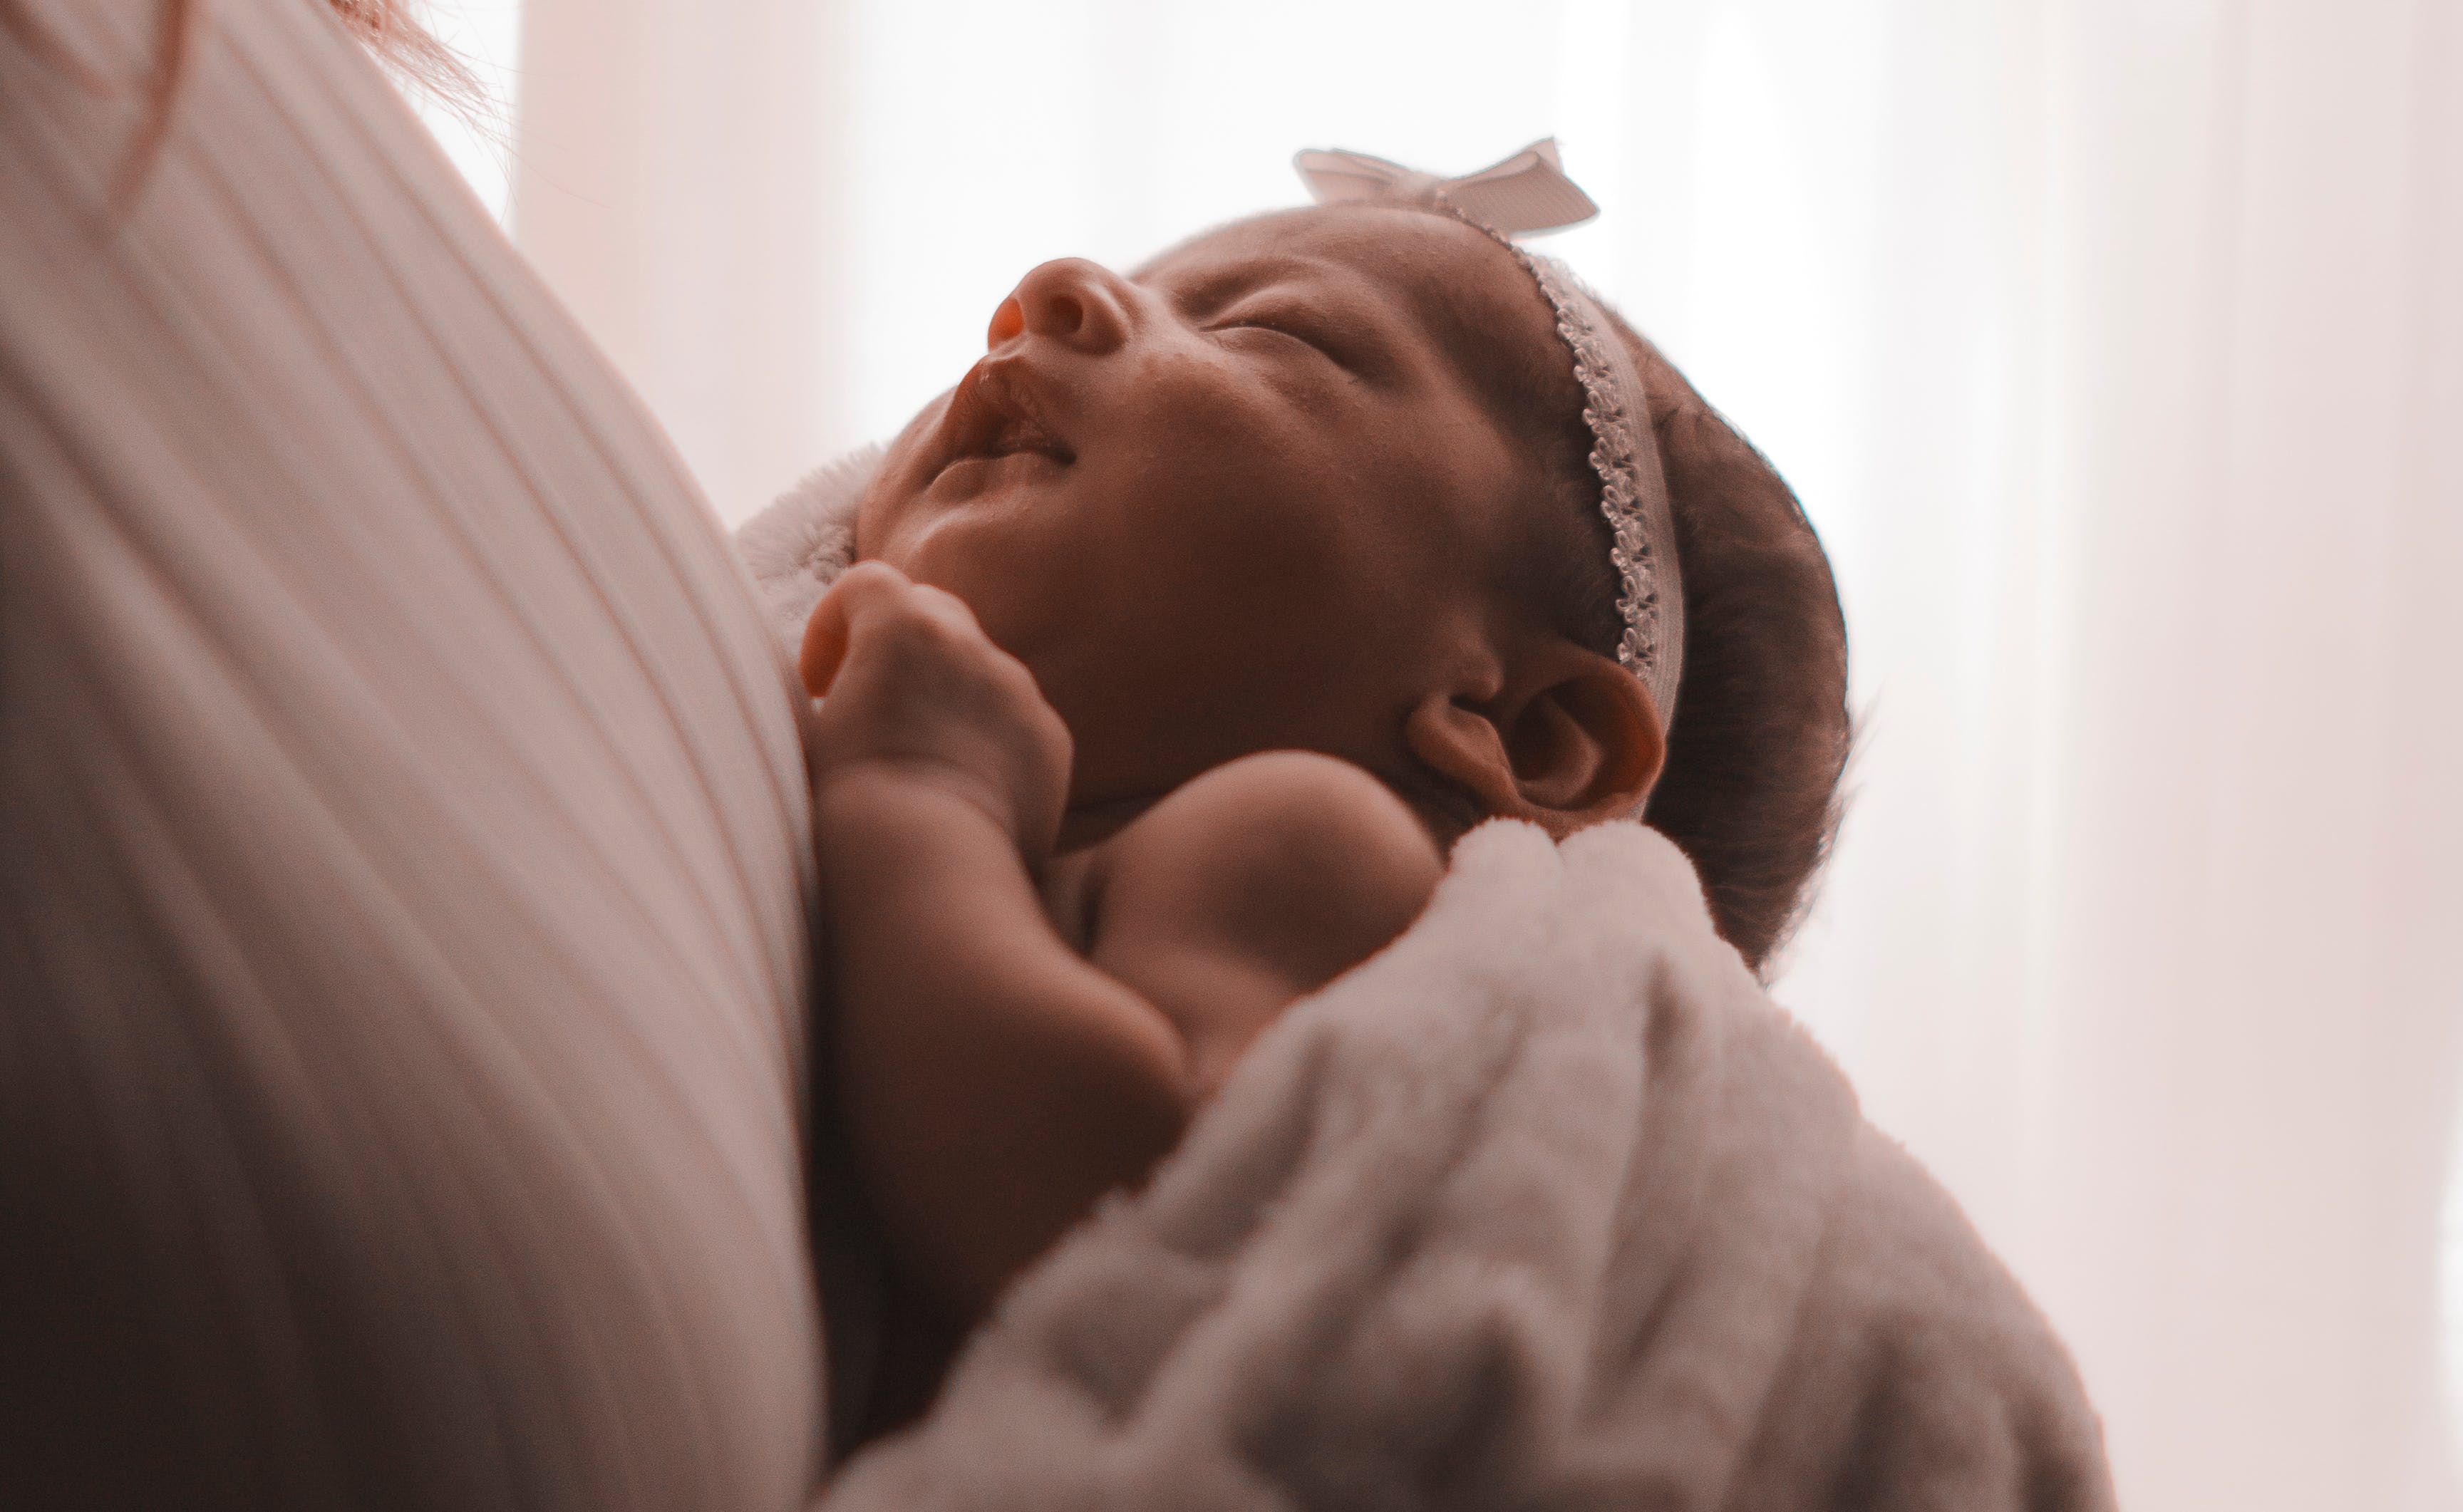 Someone holding a sleeping baby | Source: Pexels